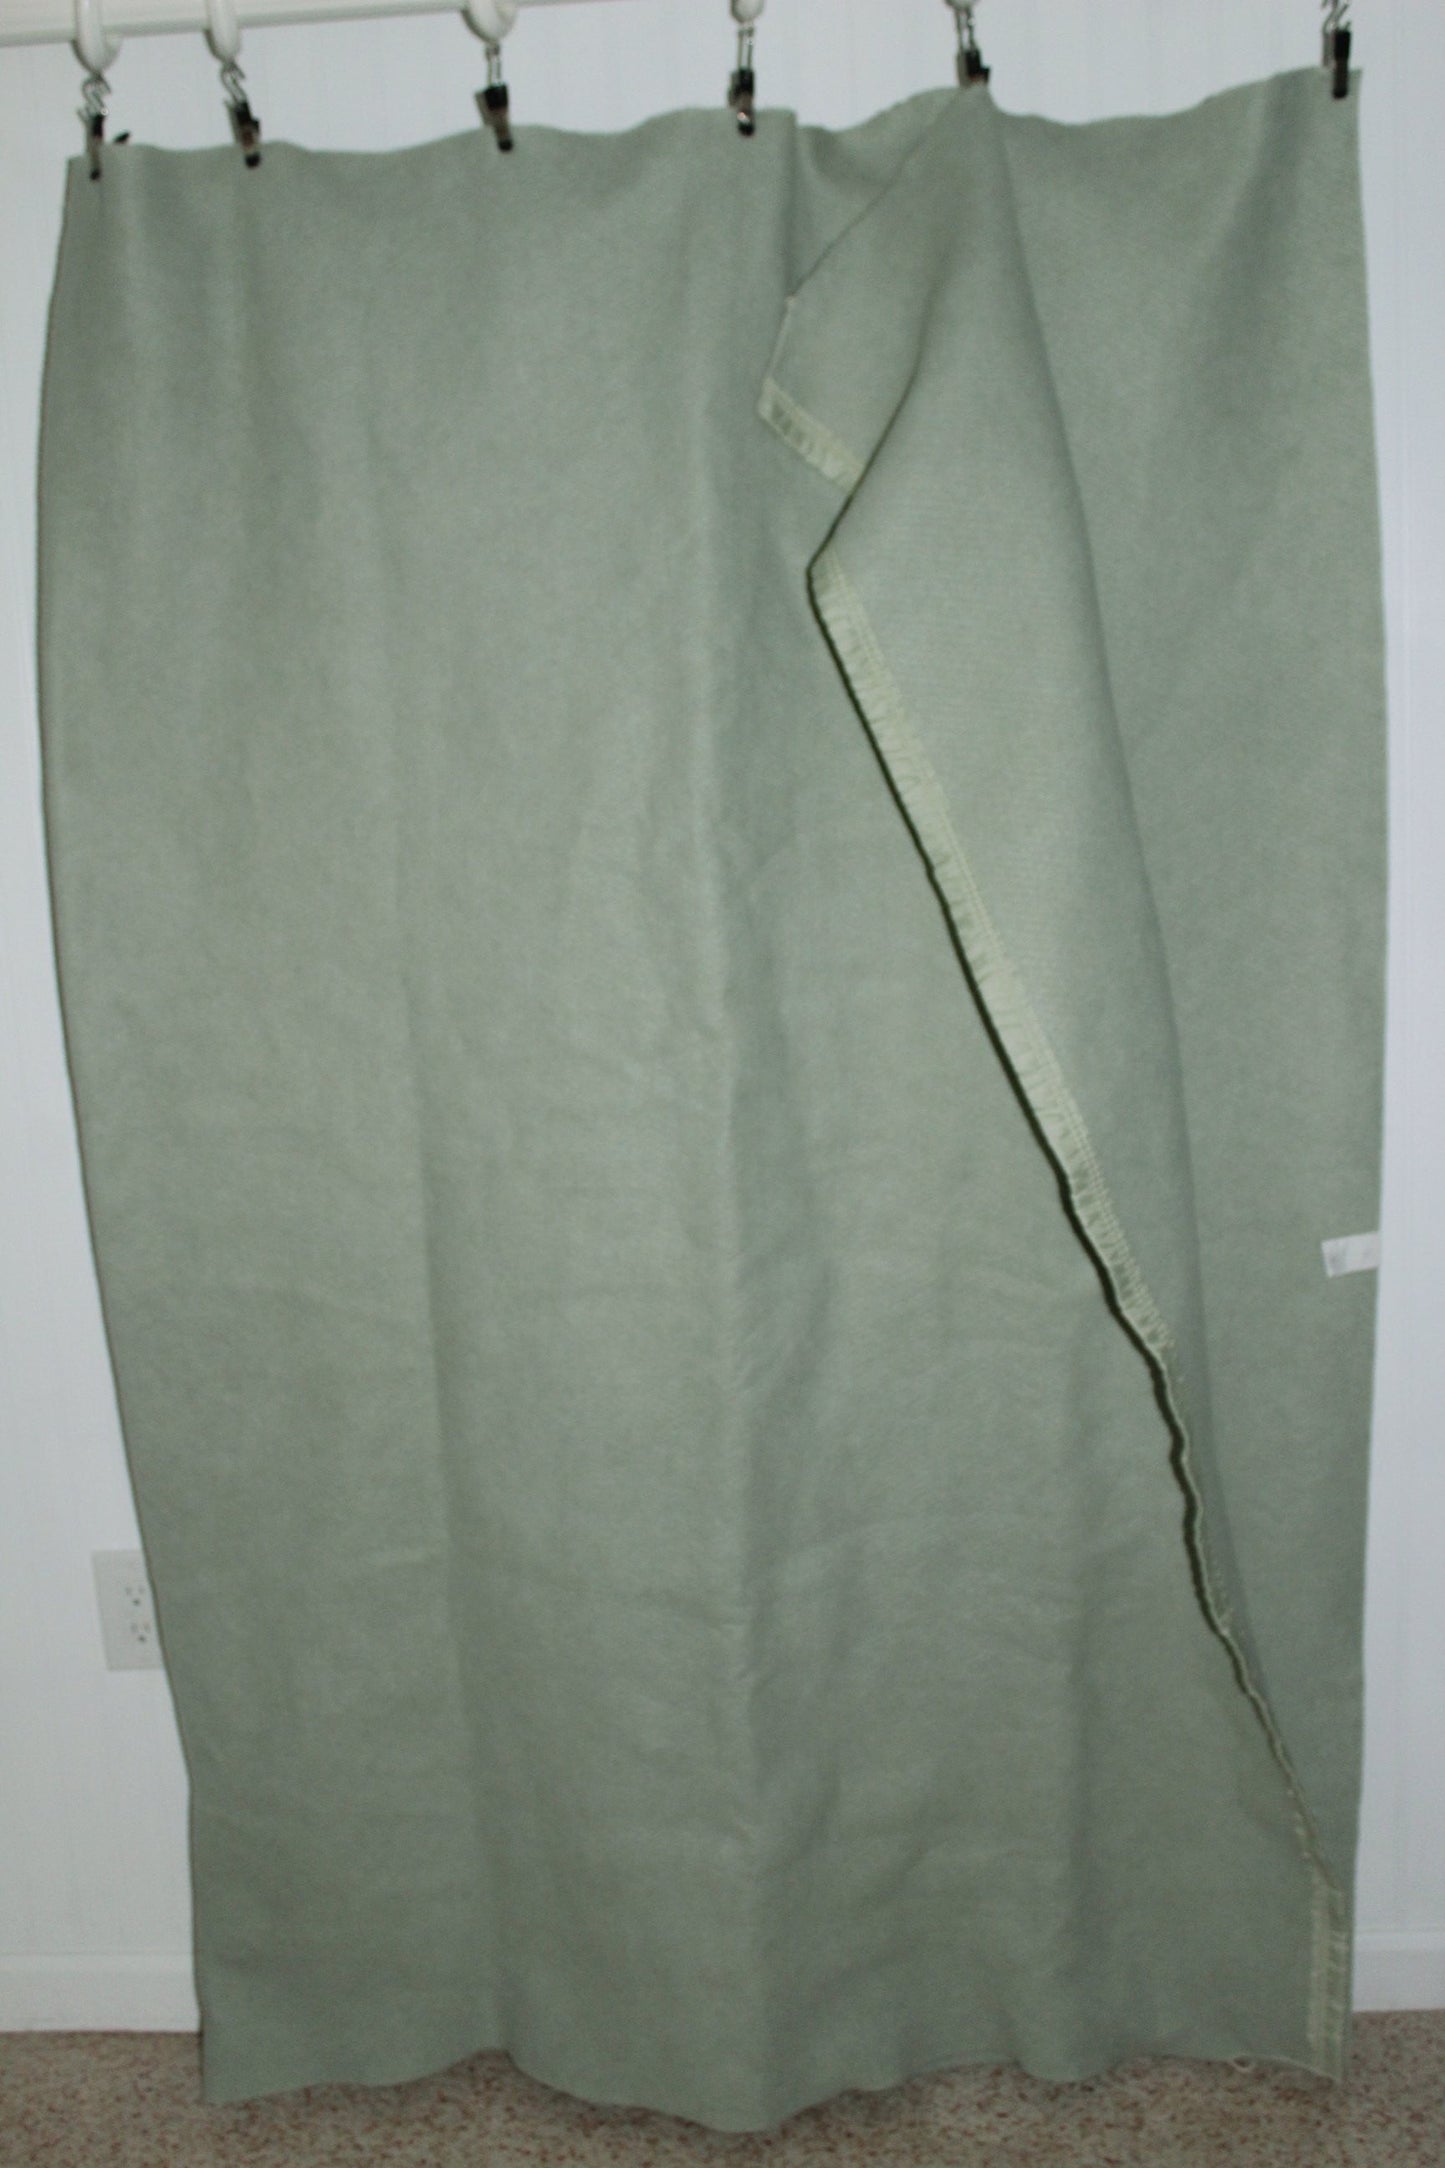 Polyester Sheet Blanket Mossy Green  69" X 90 all Year Use 100% poly